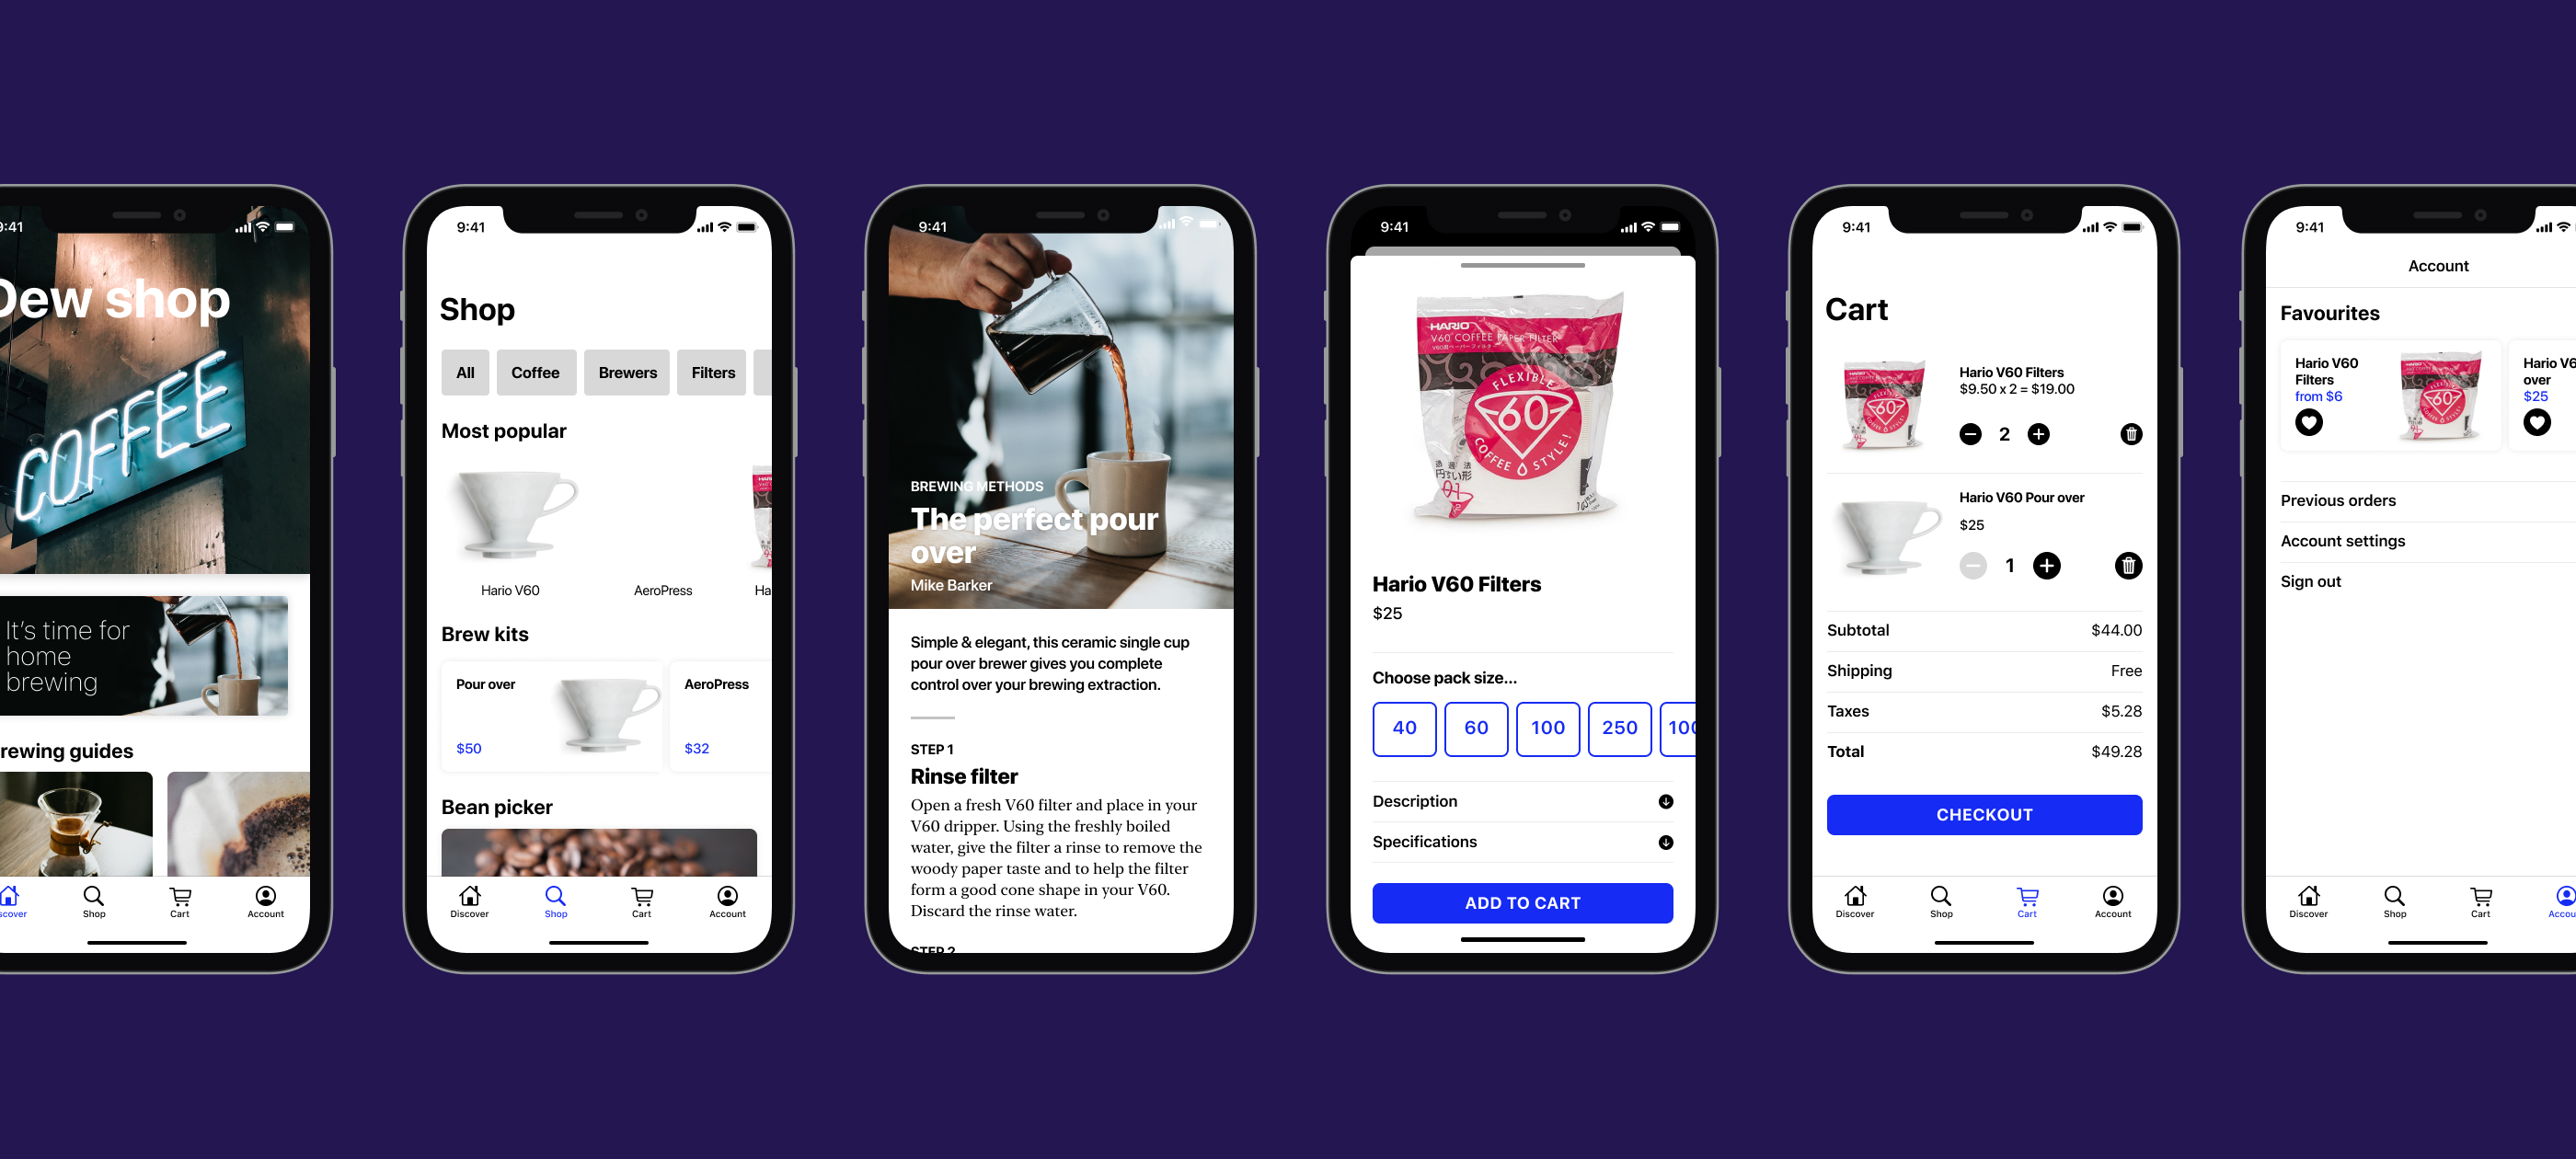 A few sample screens from a coffee shop ecommerce app